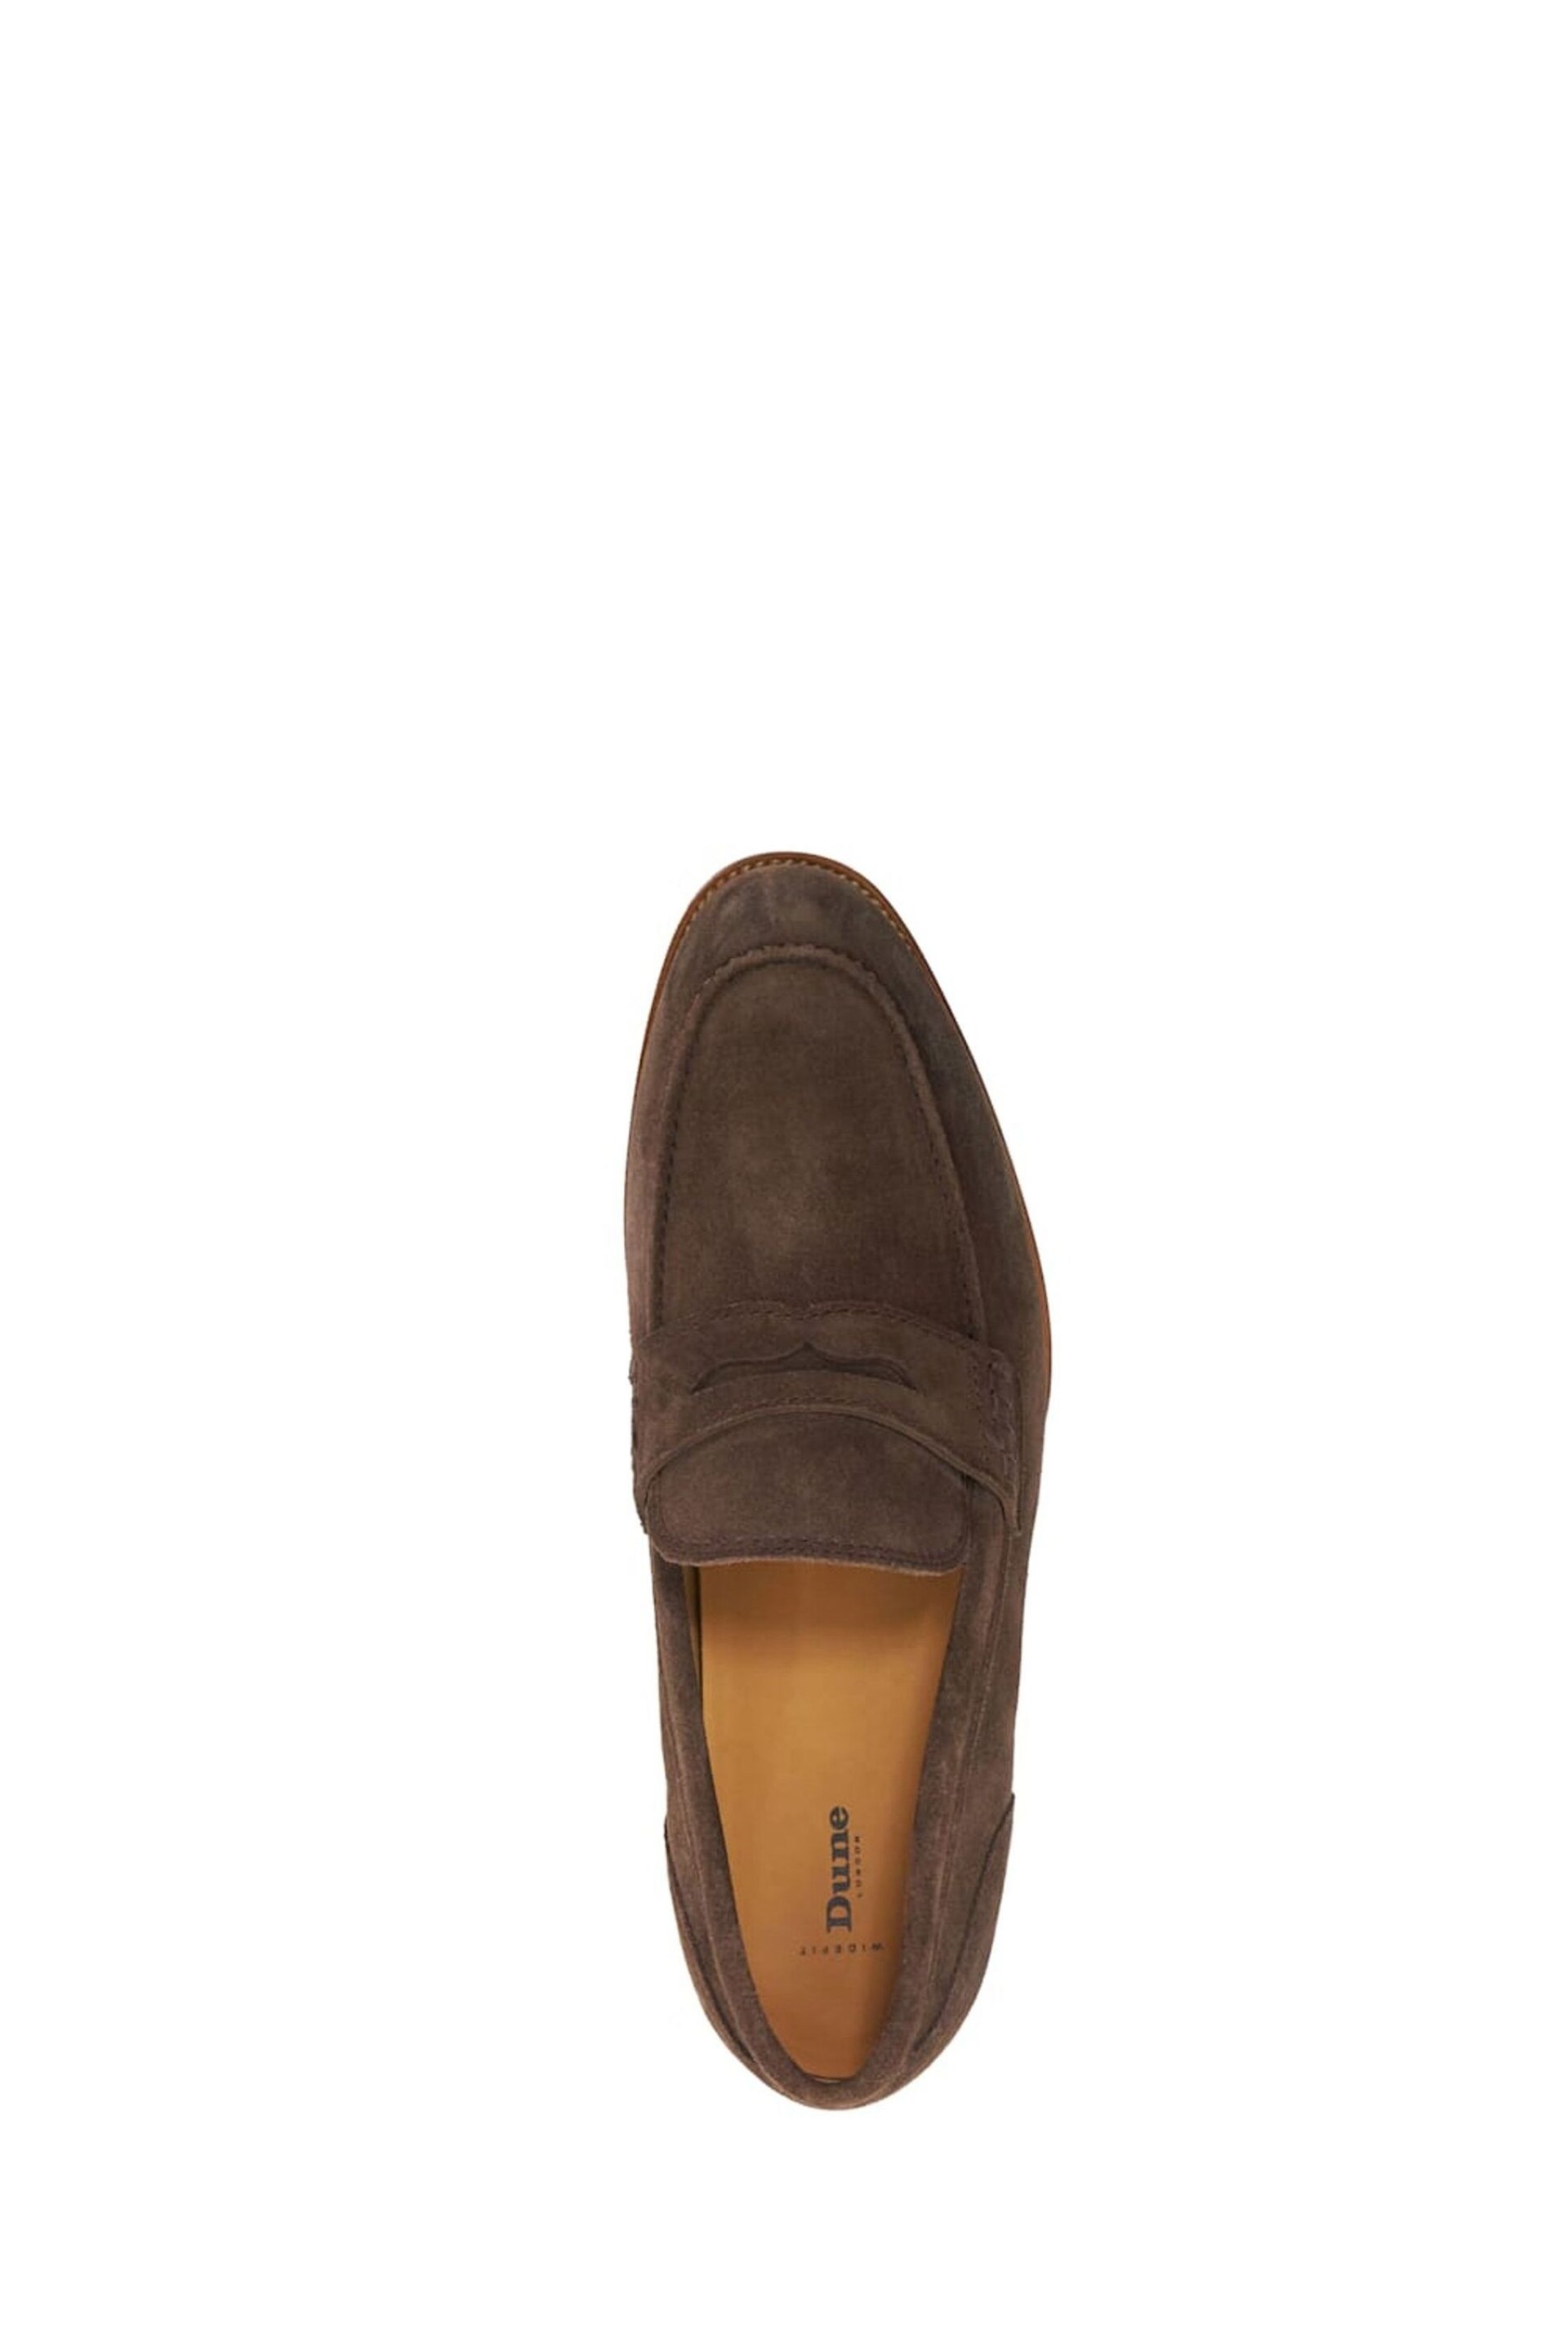 Dune London Brown Wide Fit Sulli Natural Sole Penny Loafers - Image 3 of 6